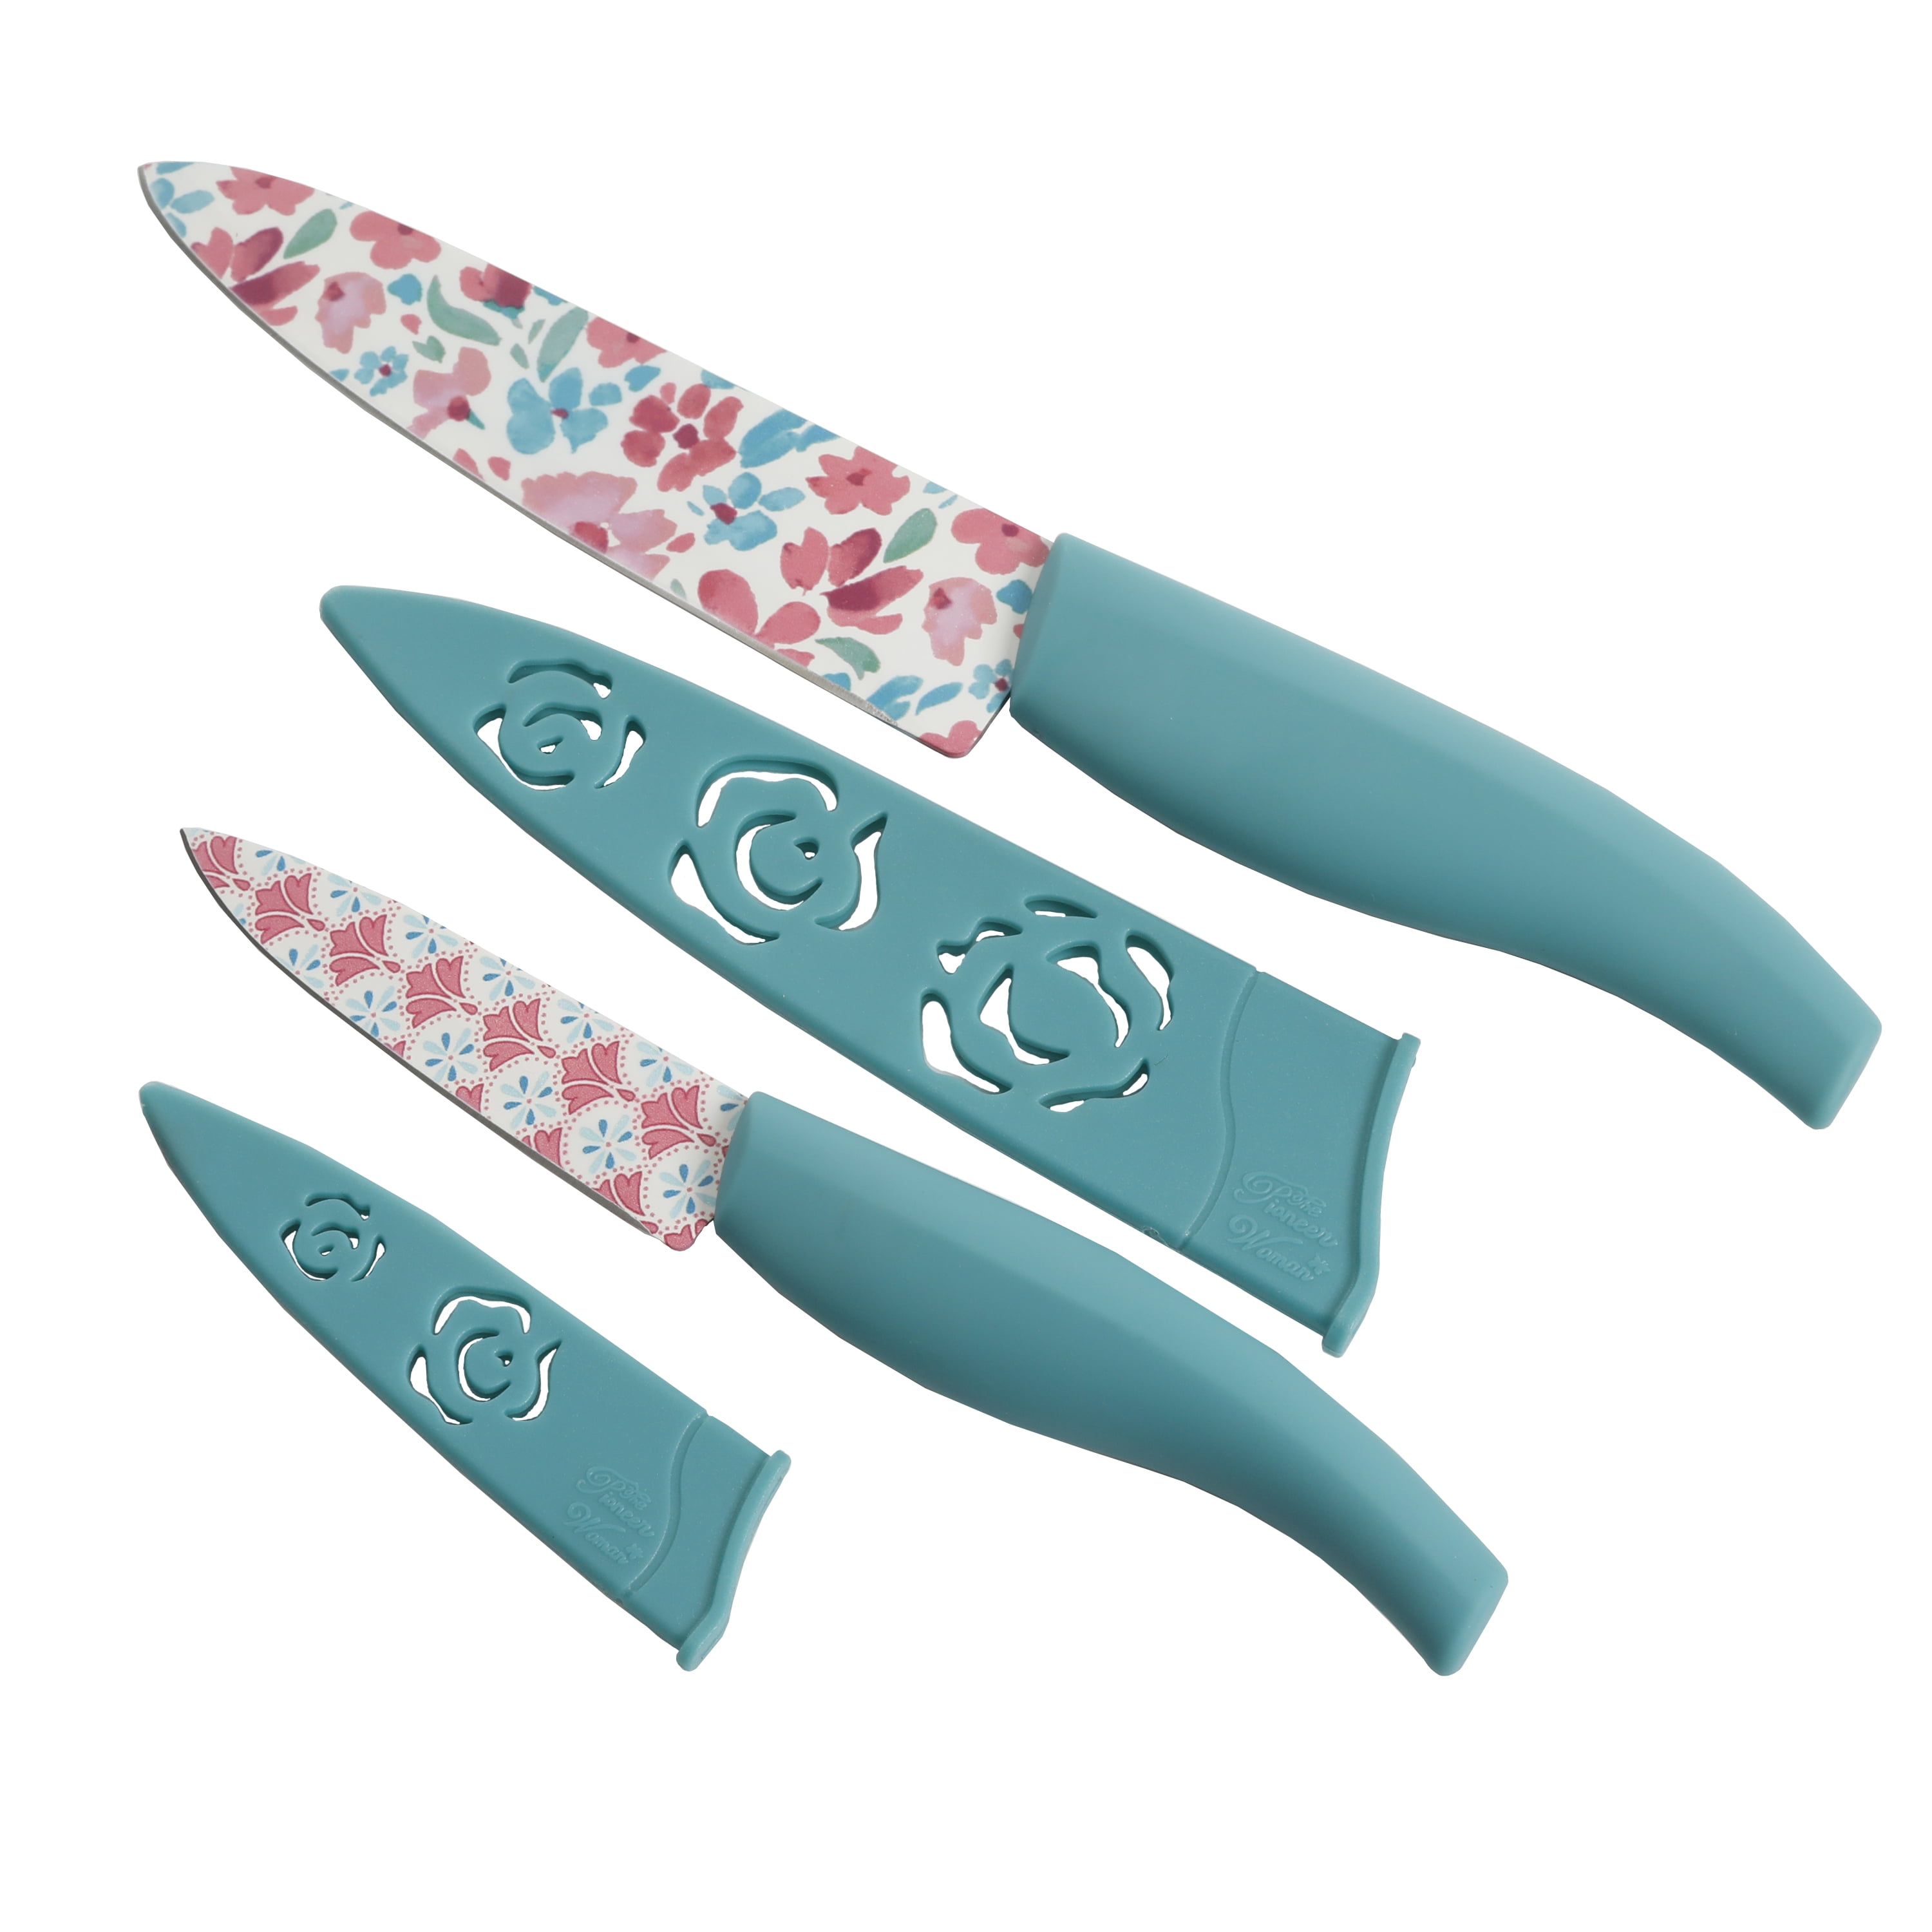 NEW! The Pioneer Woman Sweet Rose 2-Piece Chef & Paring Knife Set With  Sheath - Cutlery & Kitchen Knives - Goshen, Indiana